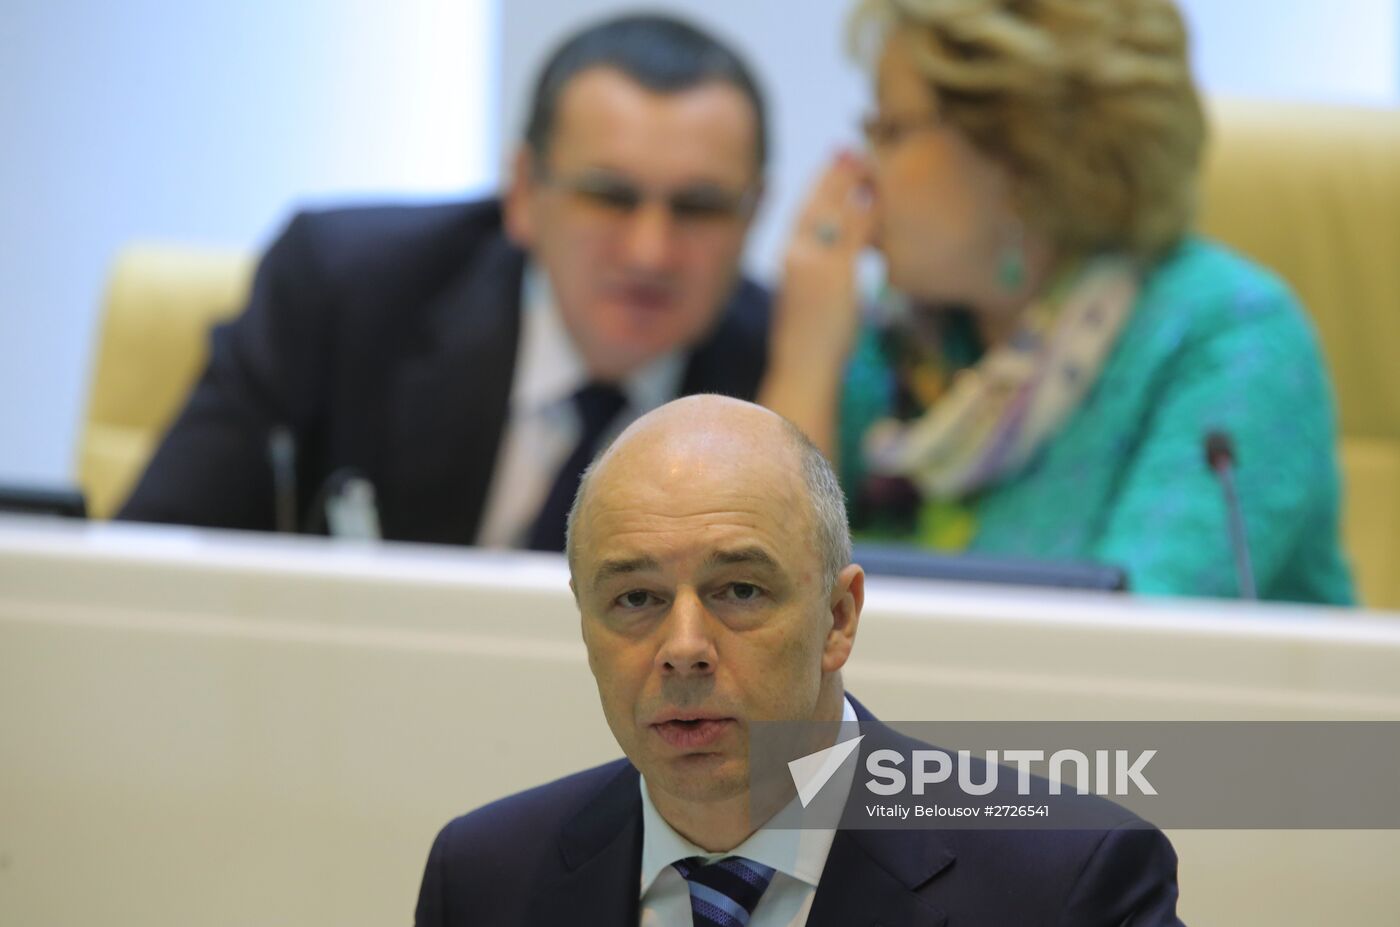 Parliamentary hearings in Federation Council on draft federal budget for 2016